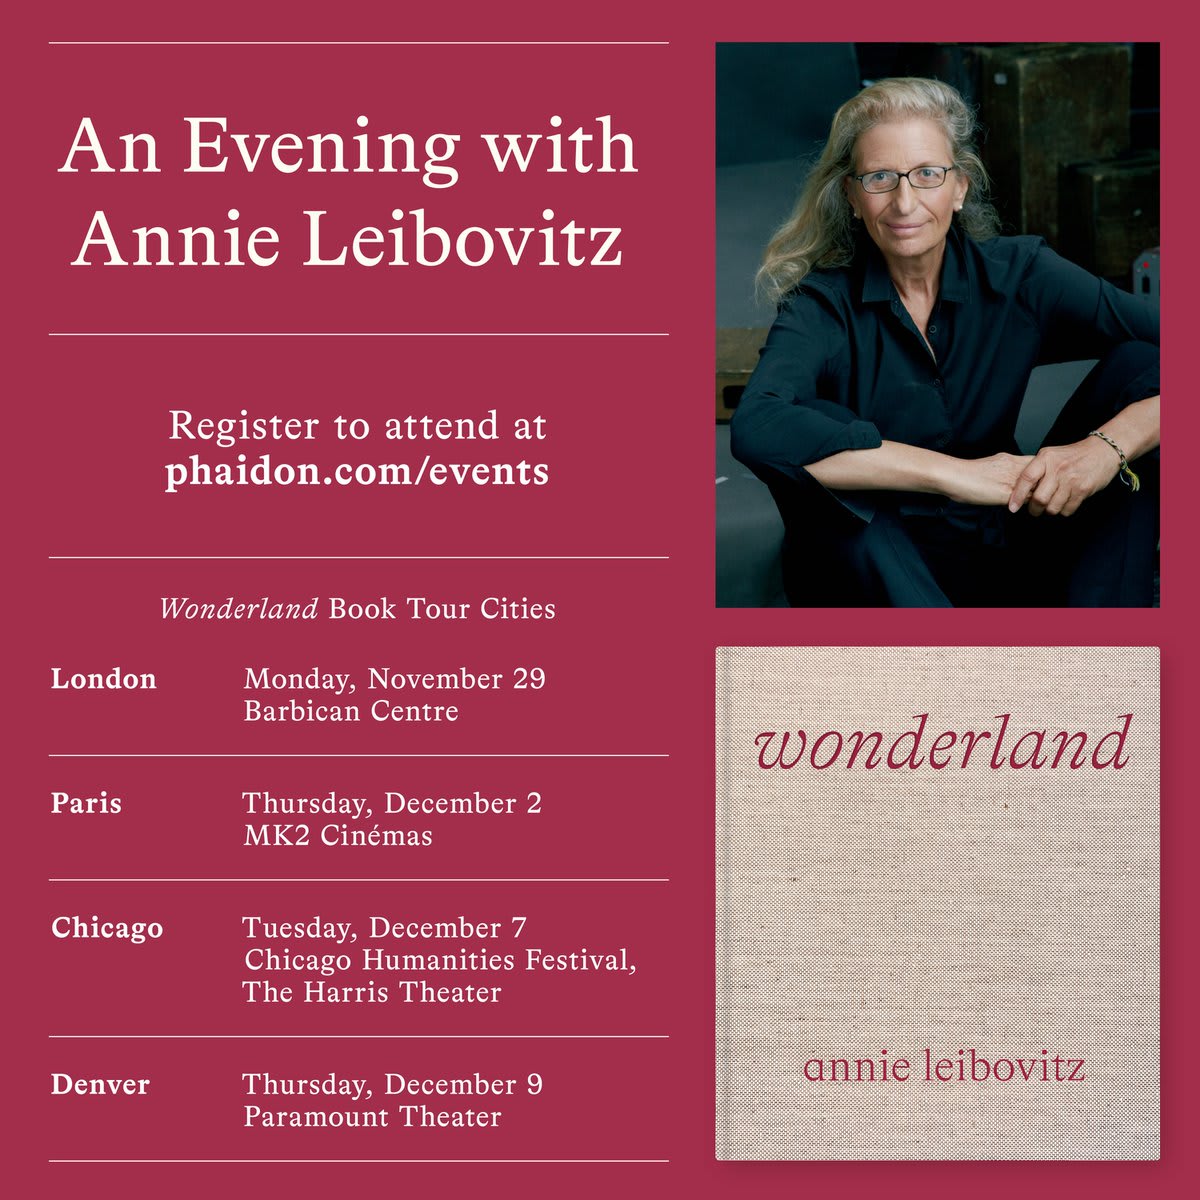 From London to Paris and Chicago to Denver! We're back in person and honored to announce the Wonderland tour featuring Annie Leibovitz in a series of conversations about her latest photography book with Phaidon RSVP here: